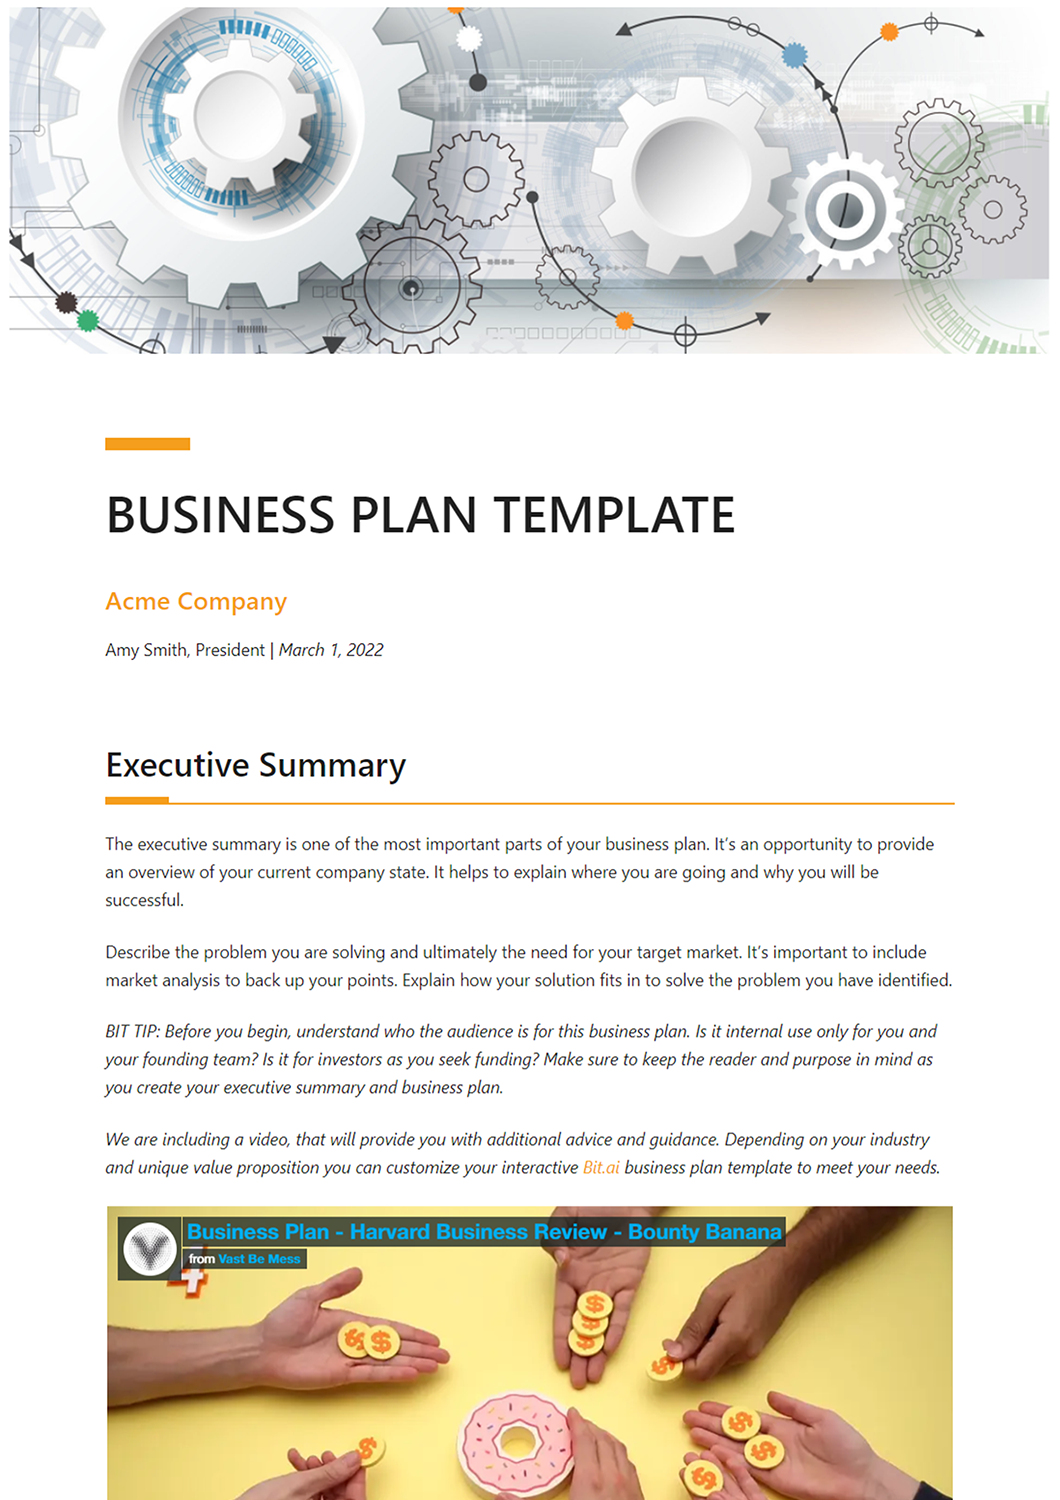 process of preparing a detailed business plan